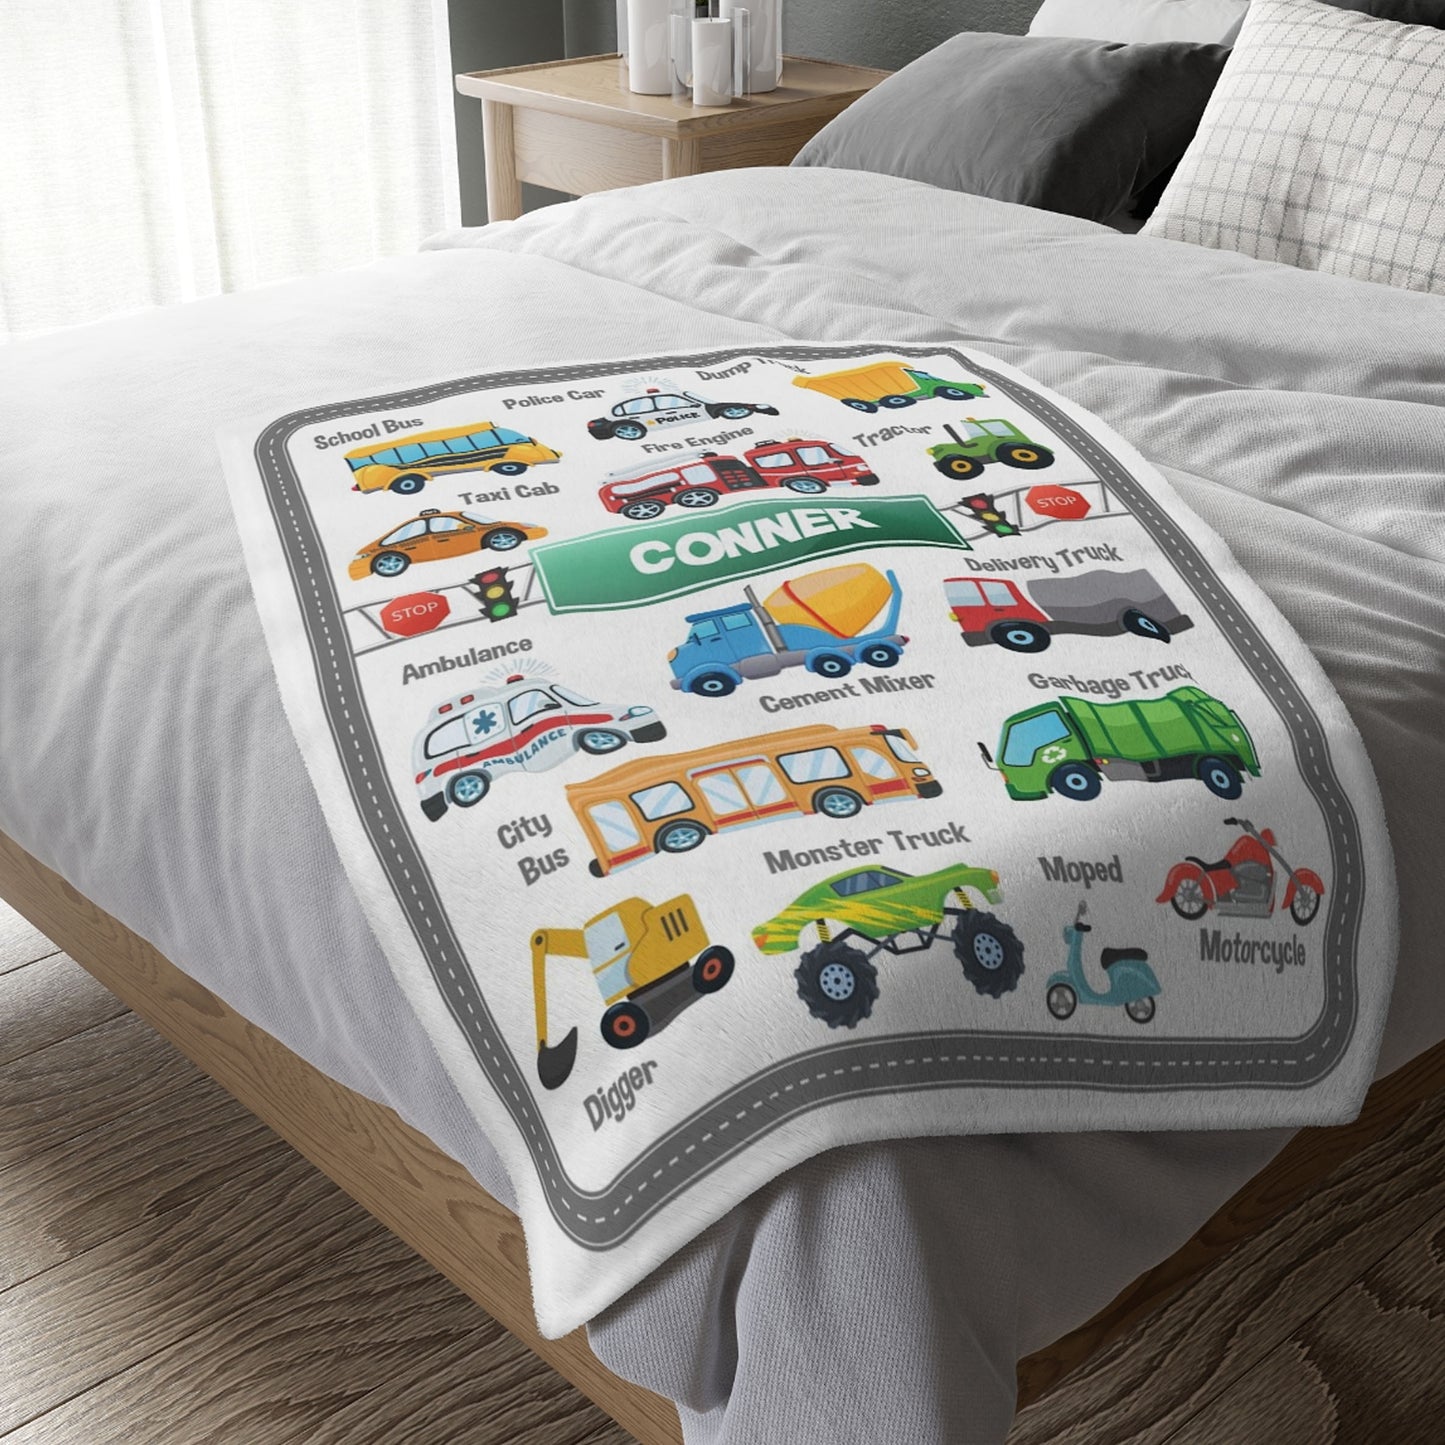 cars theme birthday party gift idea, cars birthday party gift